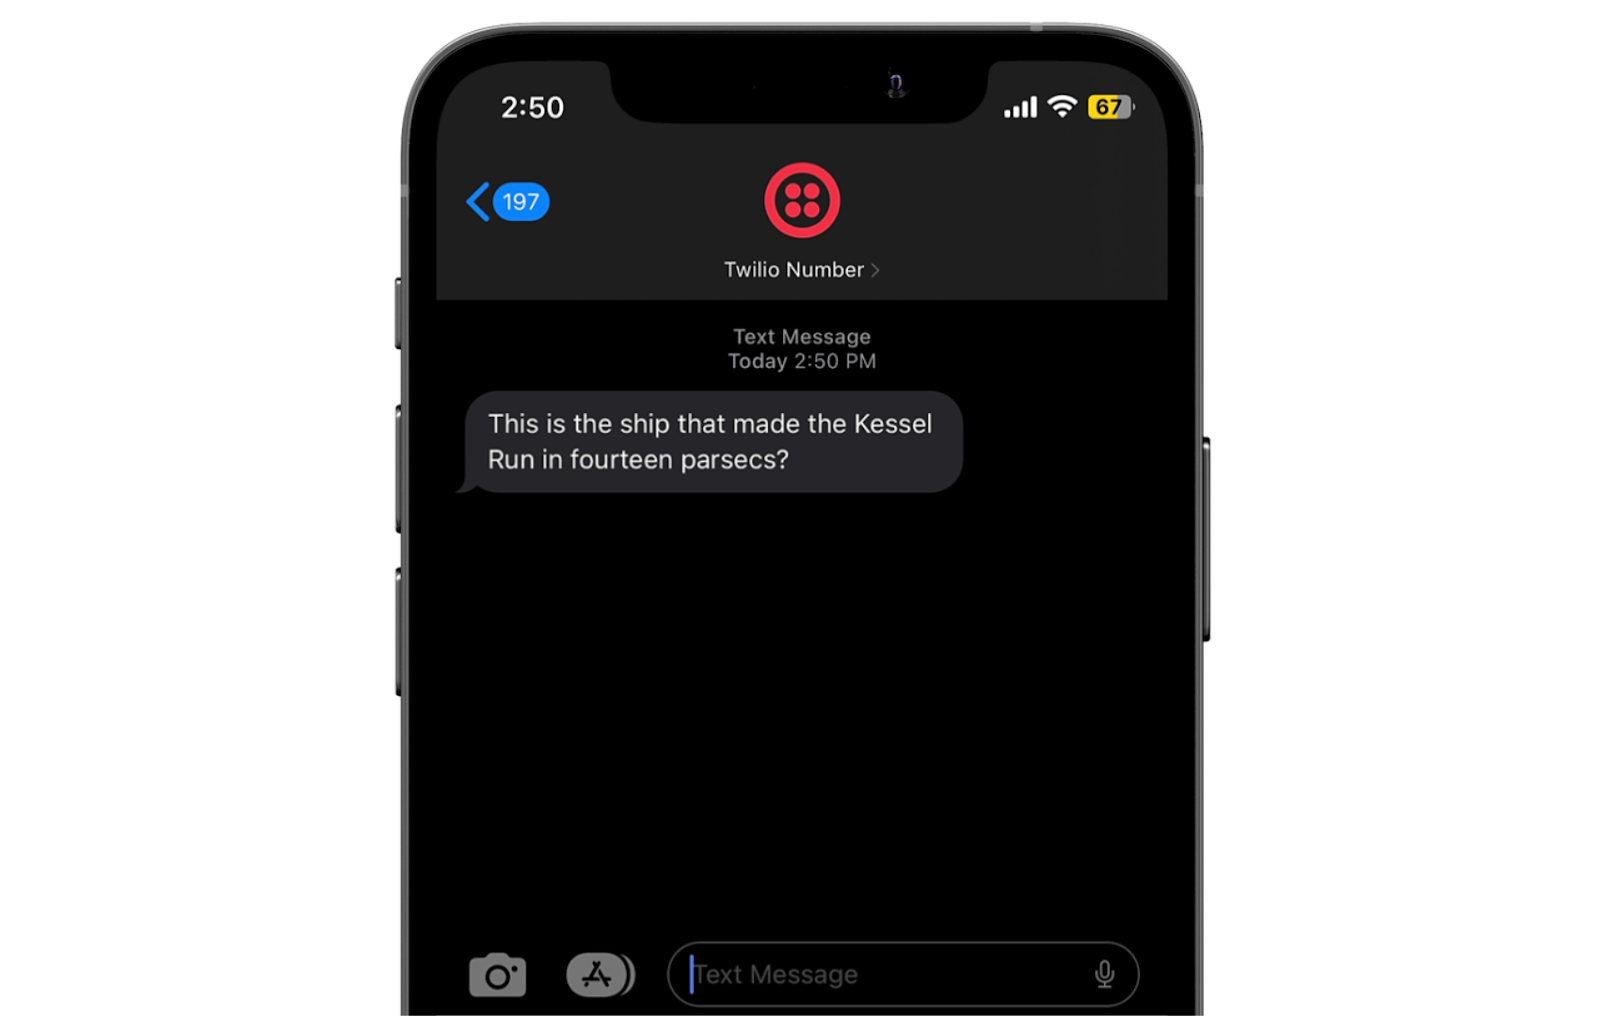 Screenshot of receiving the SMS in the iOS Messages application